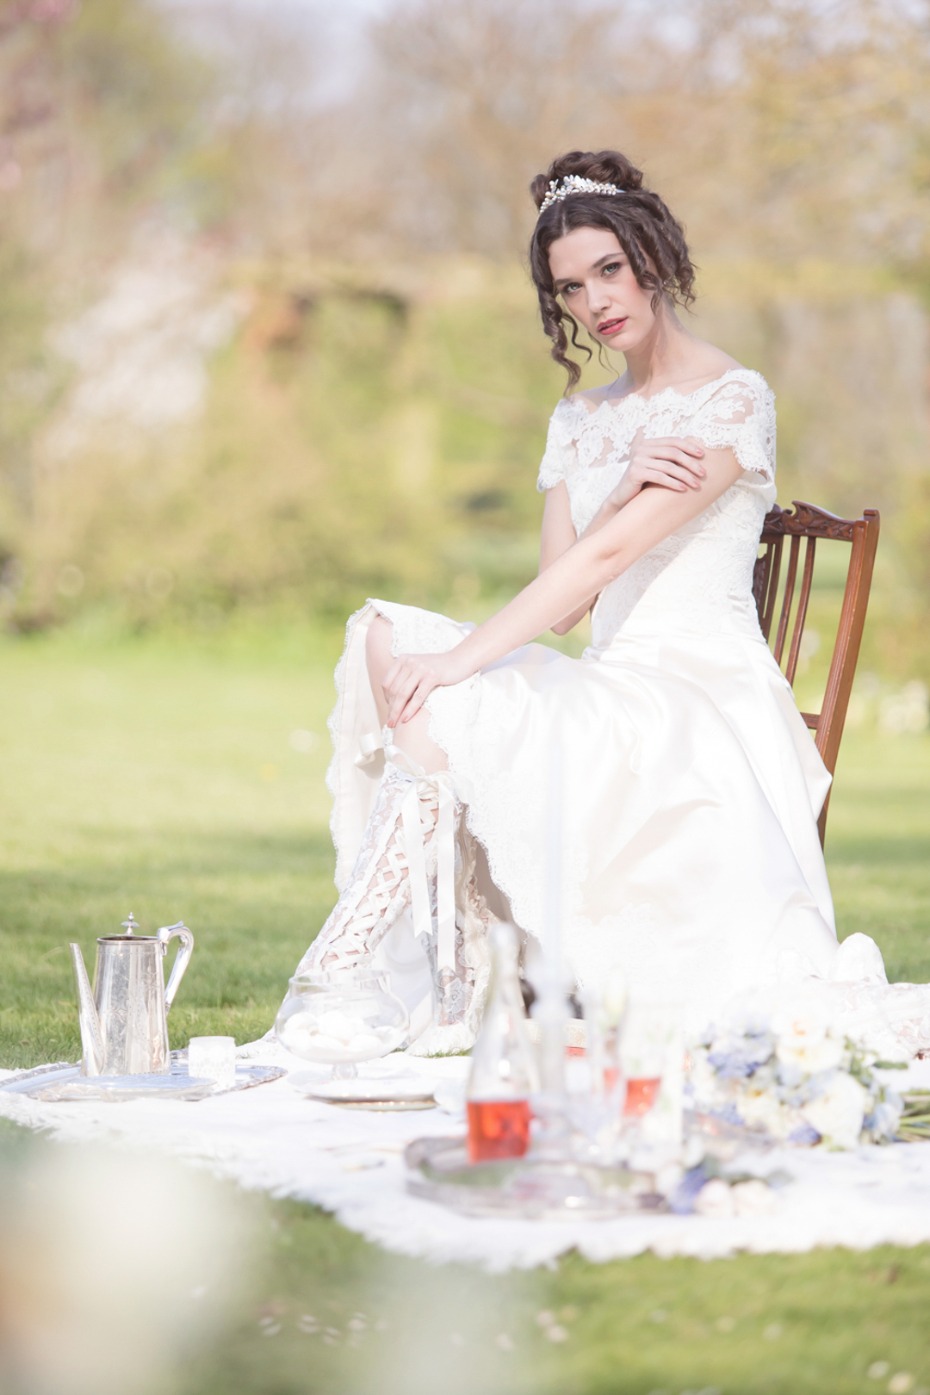 If You Love Sense and Sensibility, You'll Love These Wedding Ideas